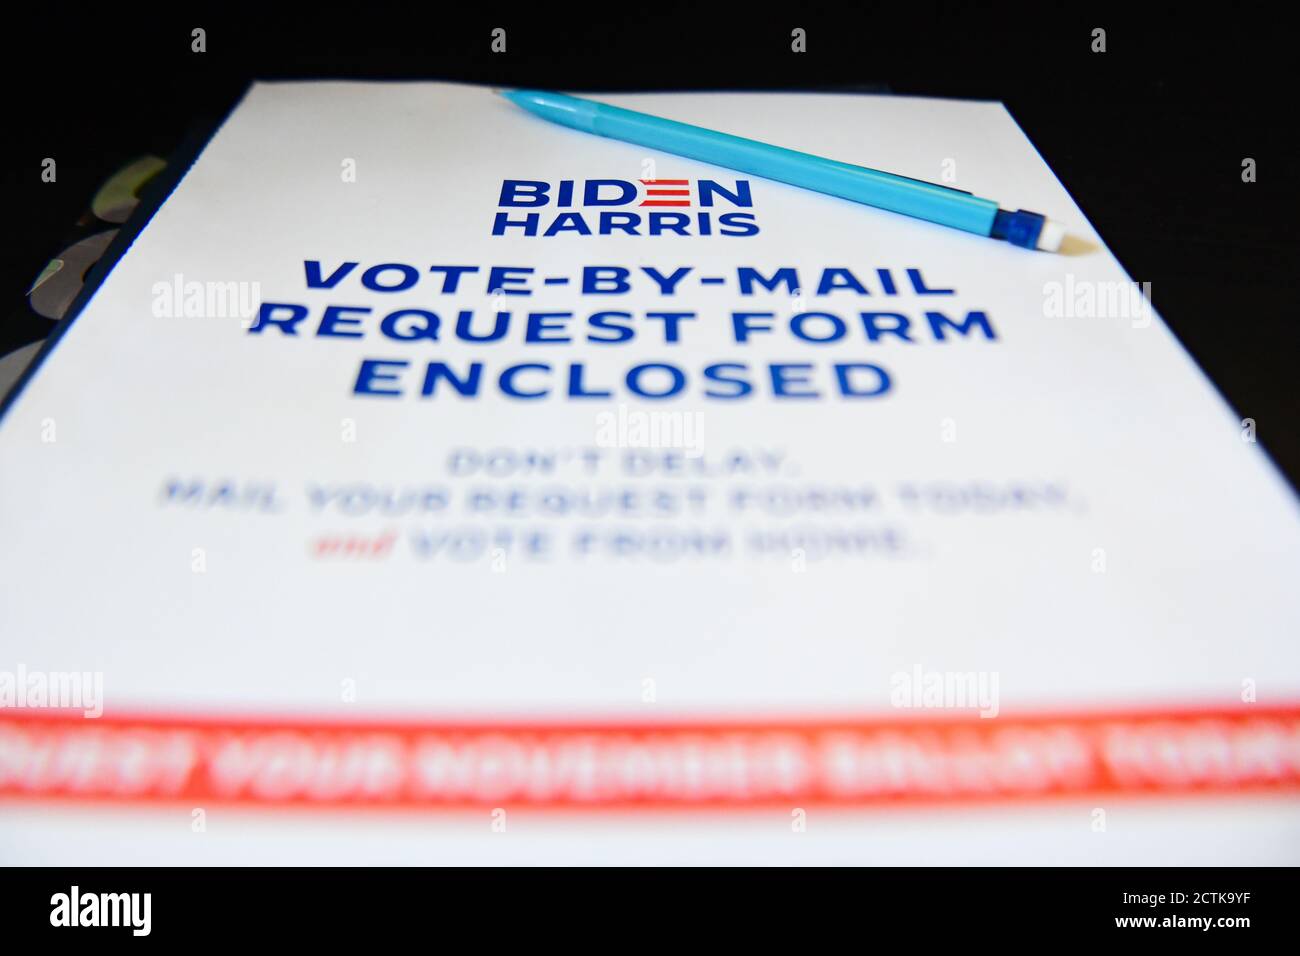 Pennsylvania, USA. 23rd Sep 2020. Vote By Mail | voting by mail - mail-in voting request forms and presidential election voting campaign materials - Joe Biden and Kamala Harris campaign voting information arrives via the United States Postal Office Credit: Don Mennig/Alamy Live News Stock Photo